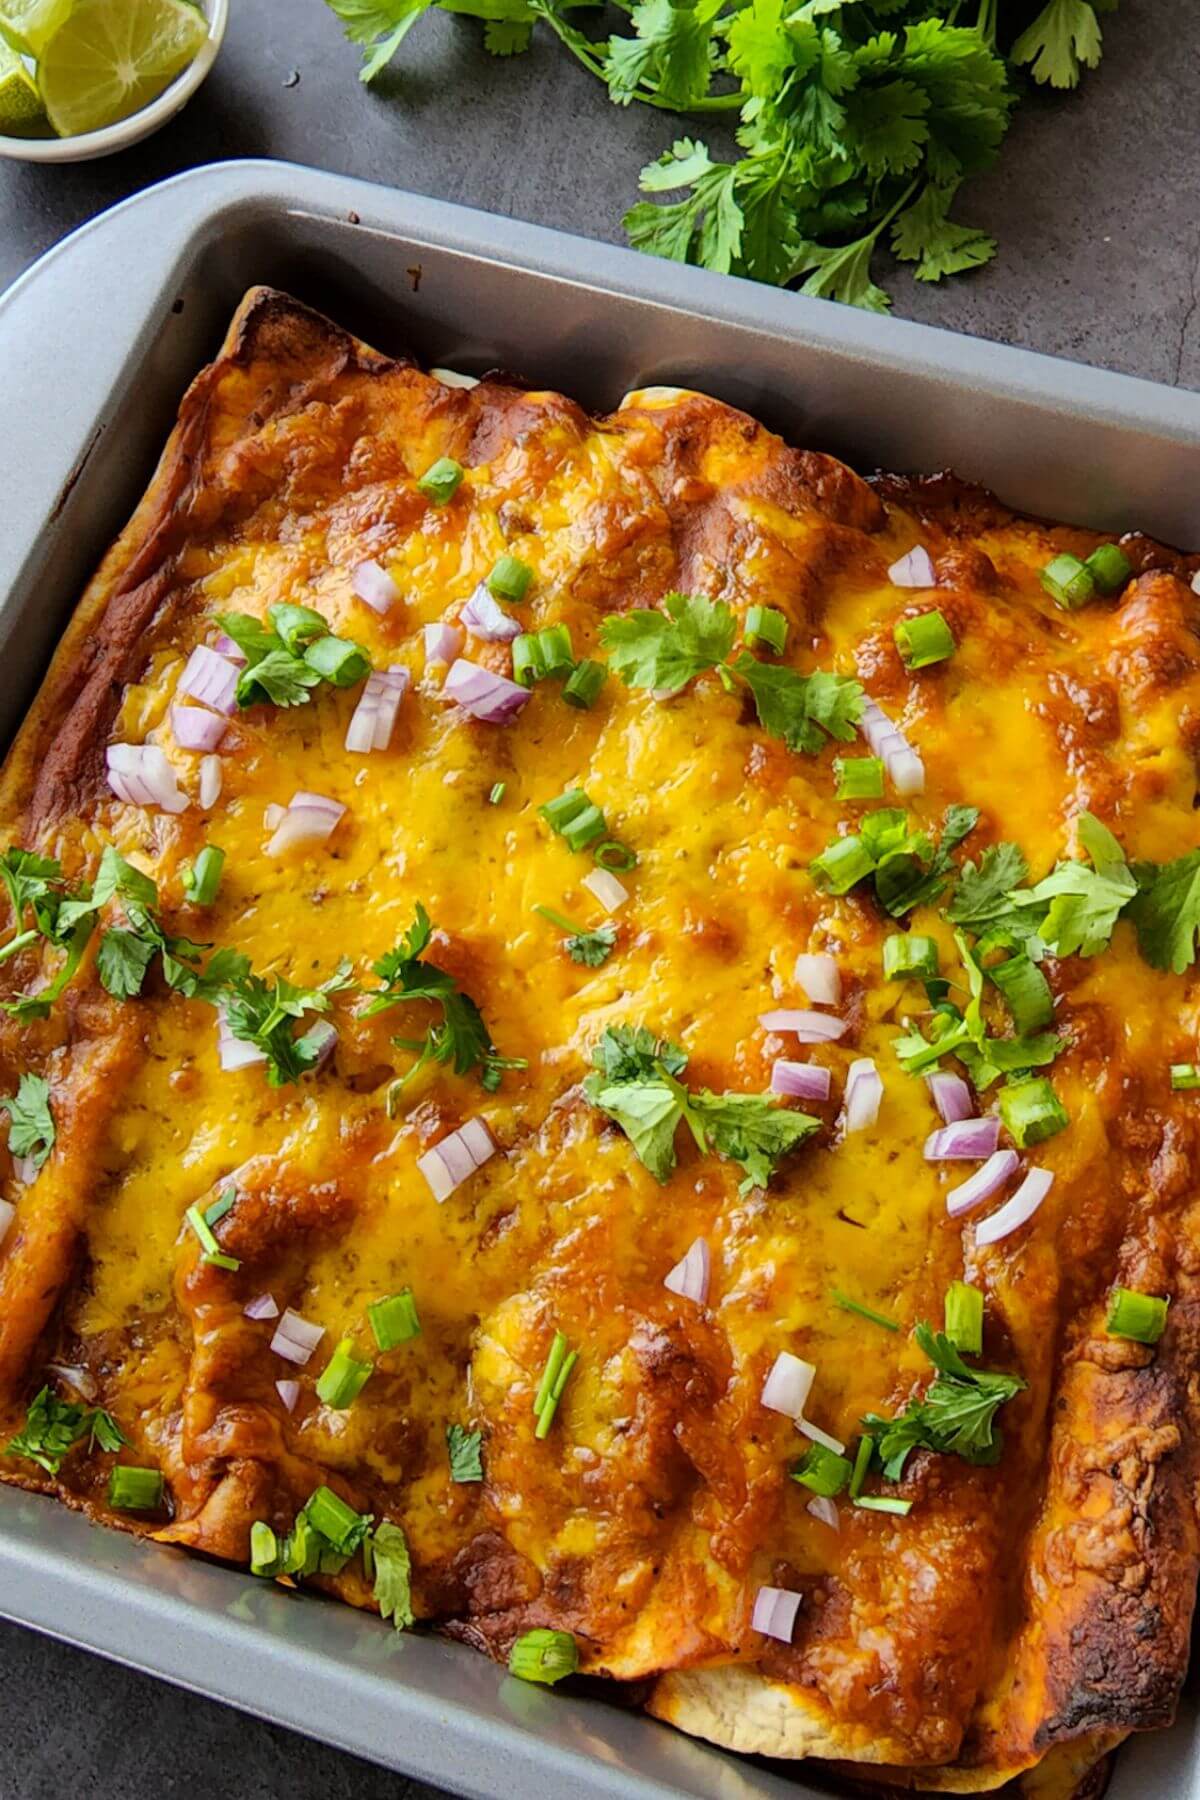 Mushroom enchiladas in a casserole topped with chopped onion and cilantro.